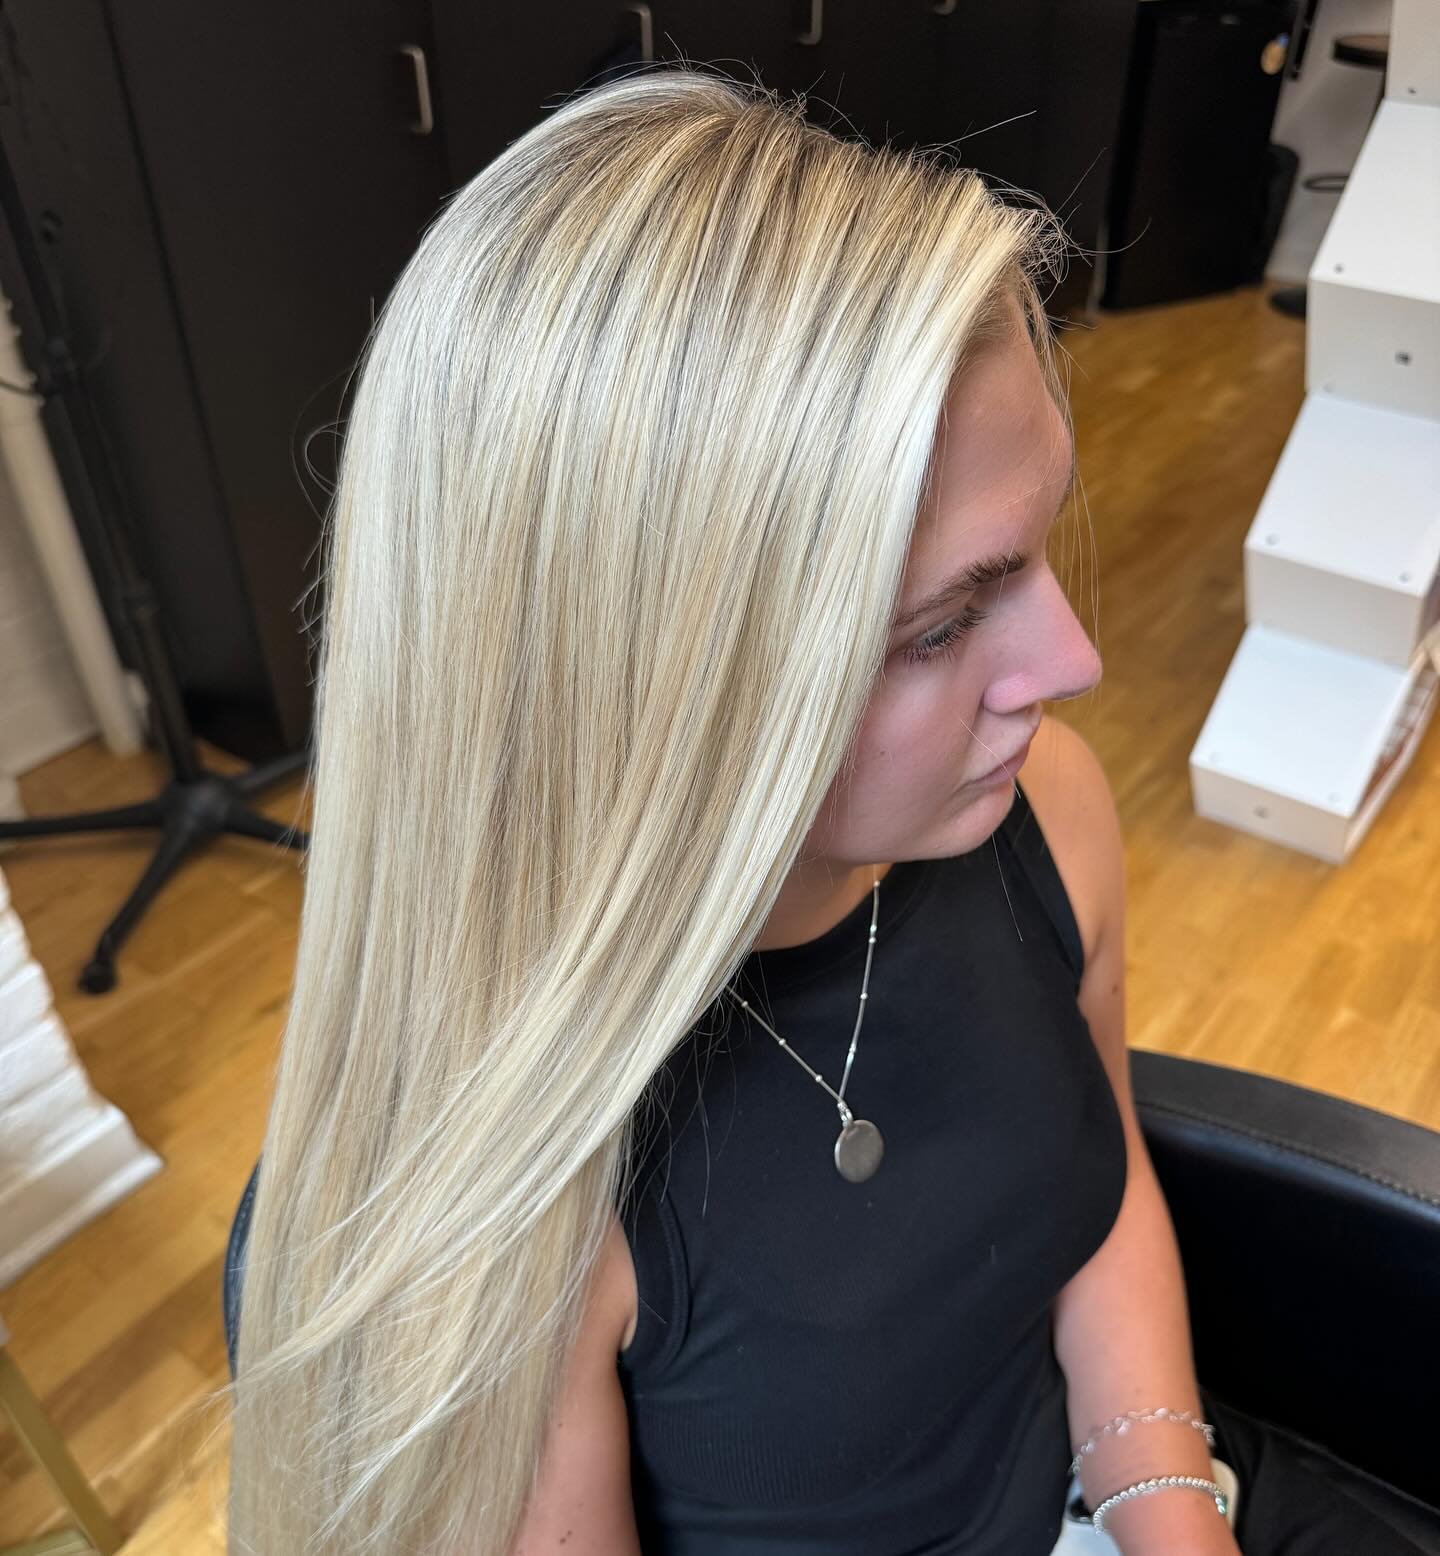 So bright your think she&rsquo;s a natural blonde 🤩 #blondebysarahp #hairbysarahp #omahahairstylist #omahahair #omahahairsalon #thesaltyblondeoldmarket